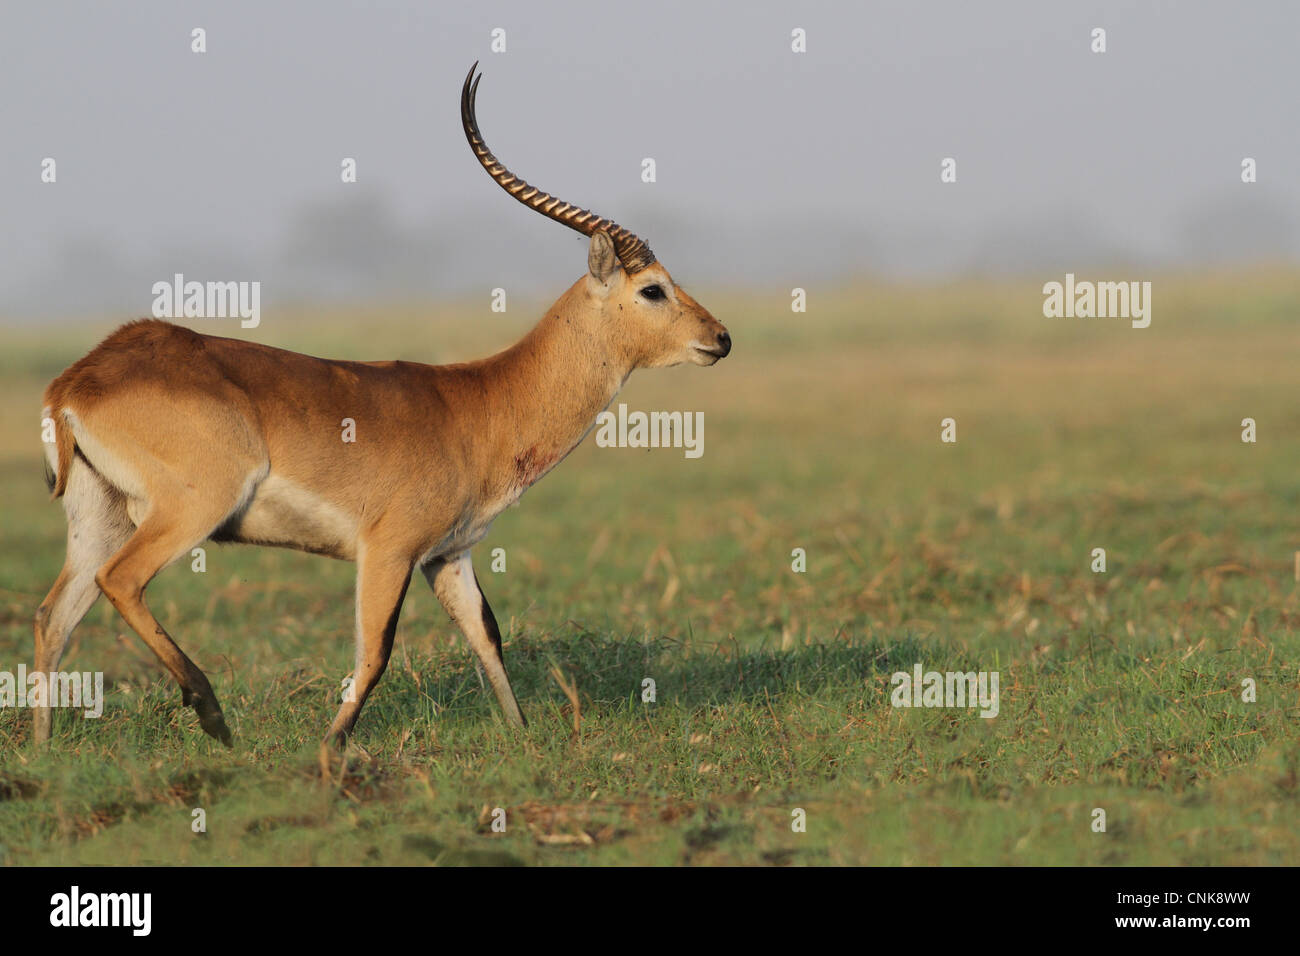 Red Lechwe (Kobus leche leche) adult male, with wound on neck, walking on grass in wetland, Chobe N.P., Botswana Stock Photo